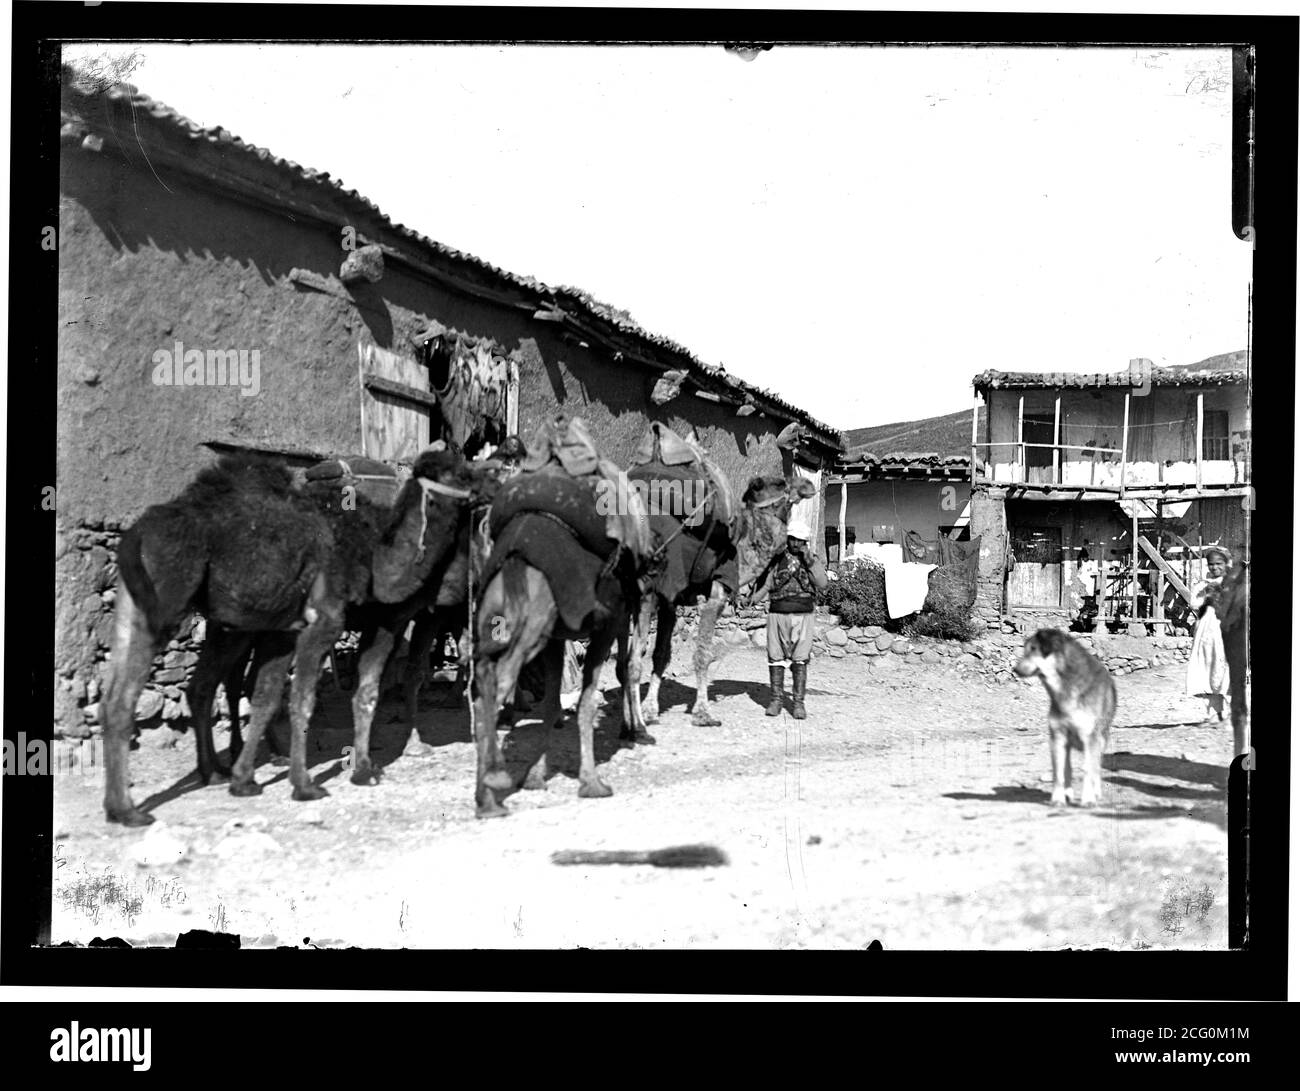 A small caravan of 4 camels packed with goods moving through a typical, small mountain village in the western part of Ottoman Turkey. The caravan leader is standing and posing for the camera, watched by a dog and a local girl. Washing on the line for drying. Photograph taken around 1910-1920. Copy from a dry glass plate, originating from the Herry W. Schaefer collection. Stock Photo